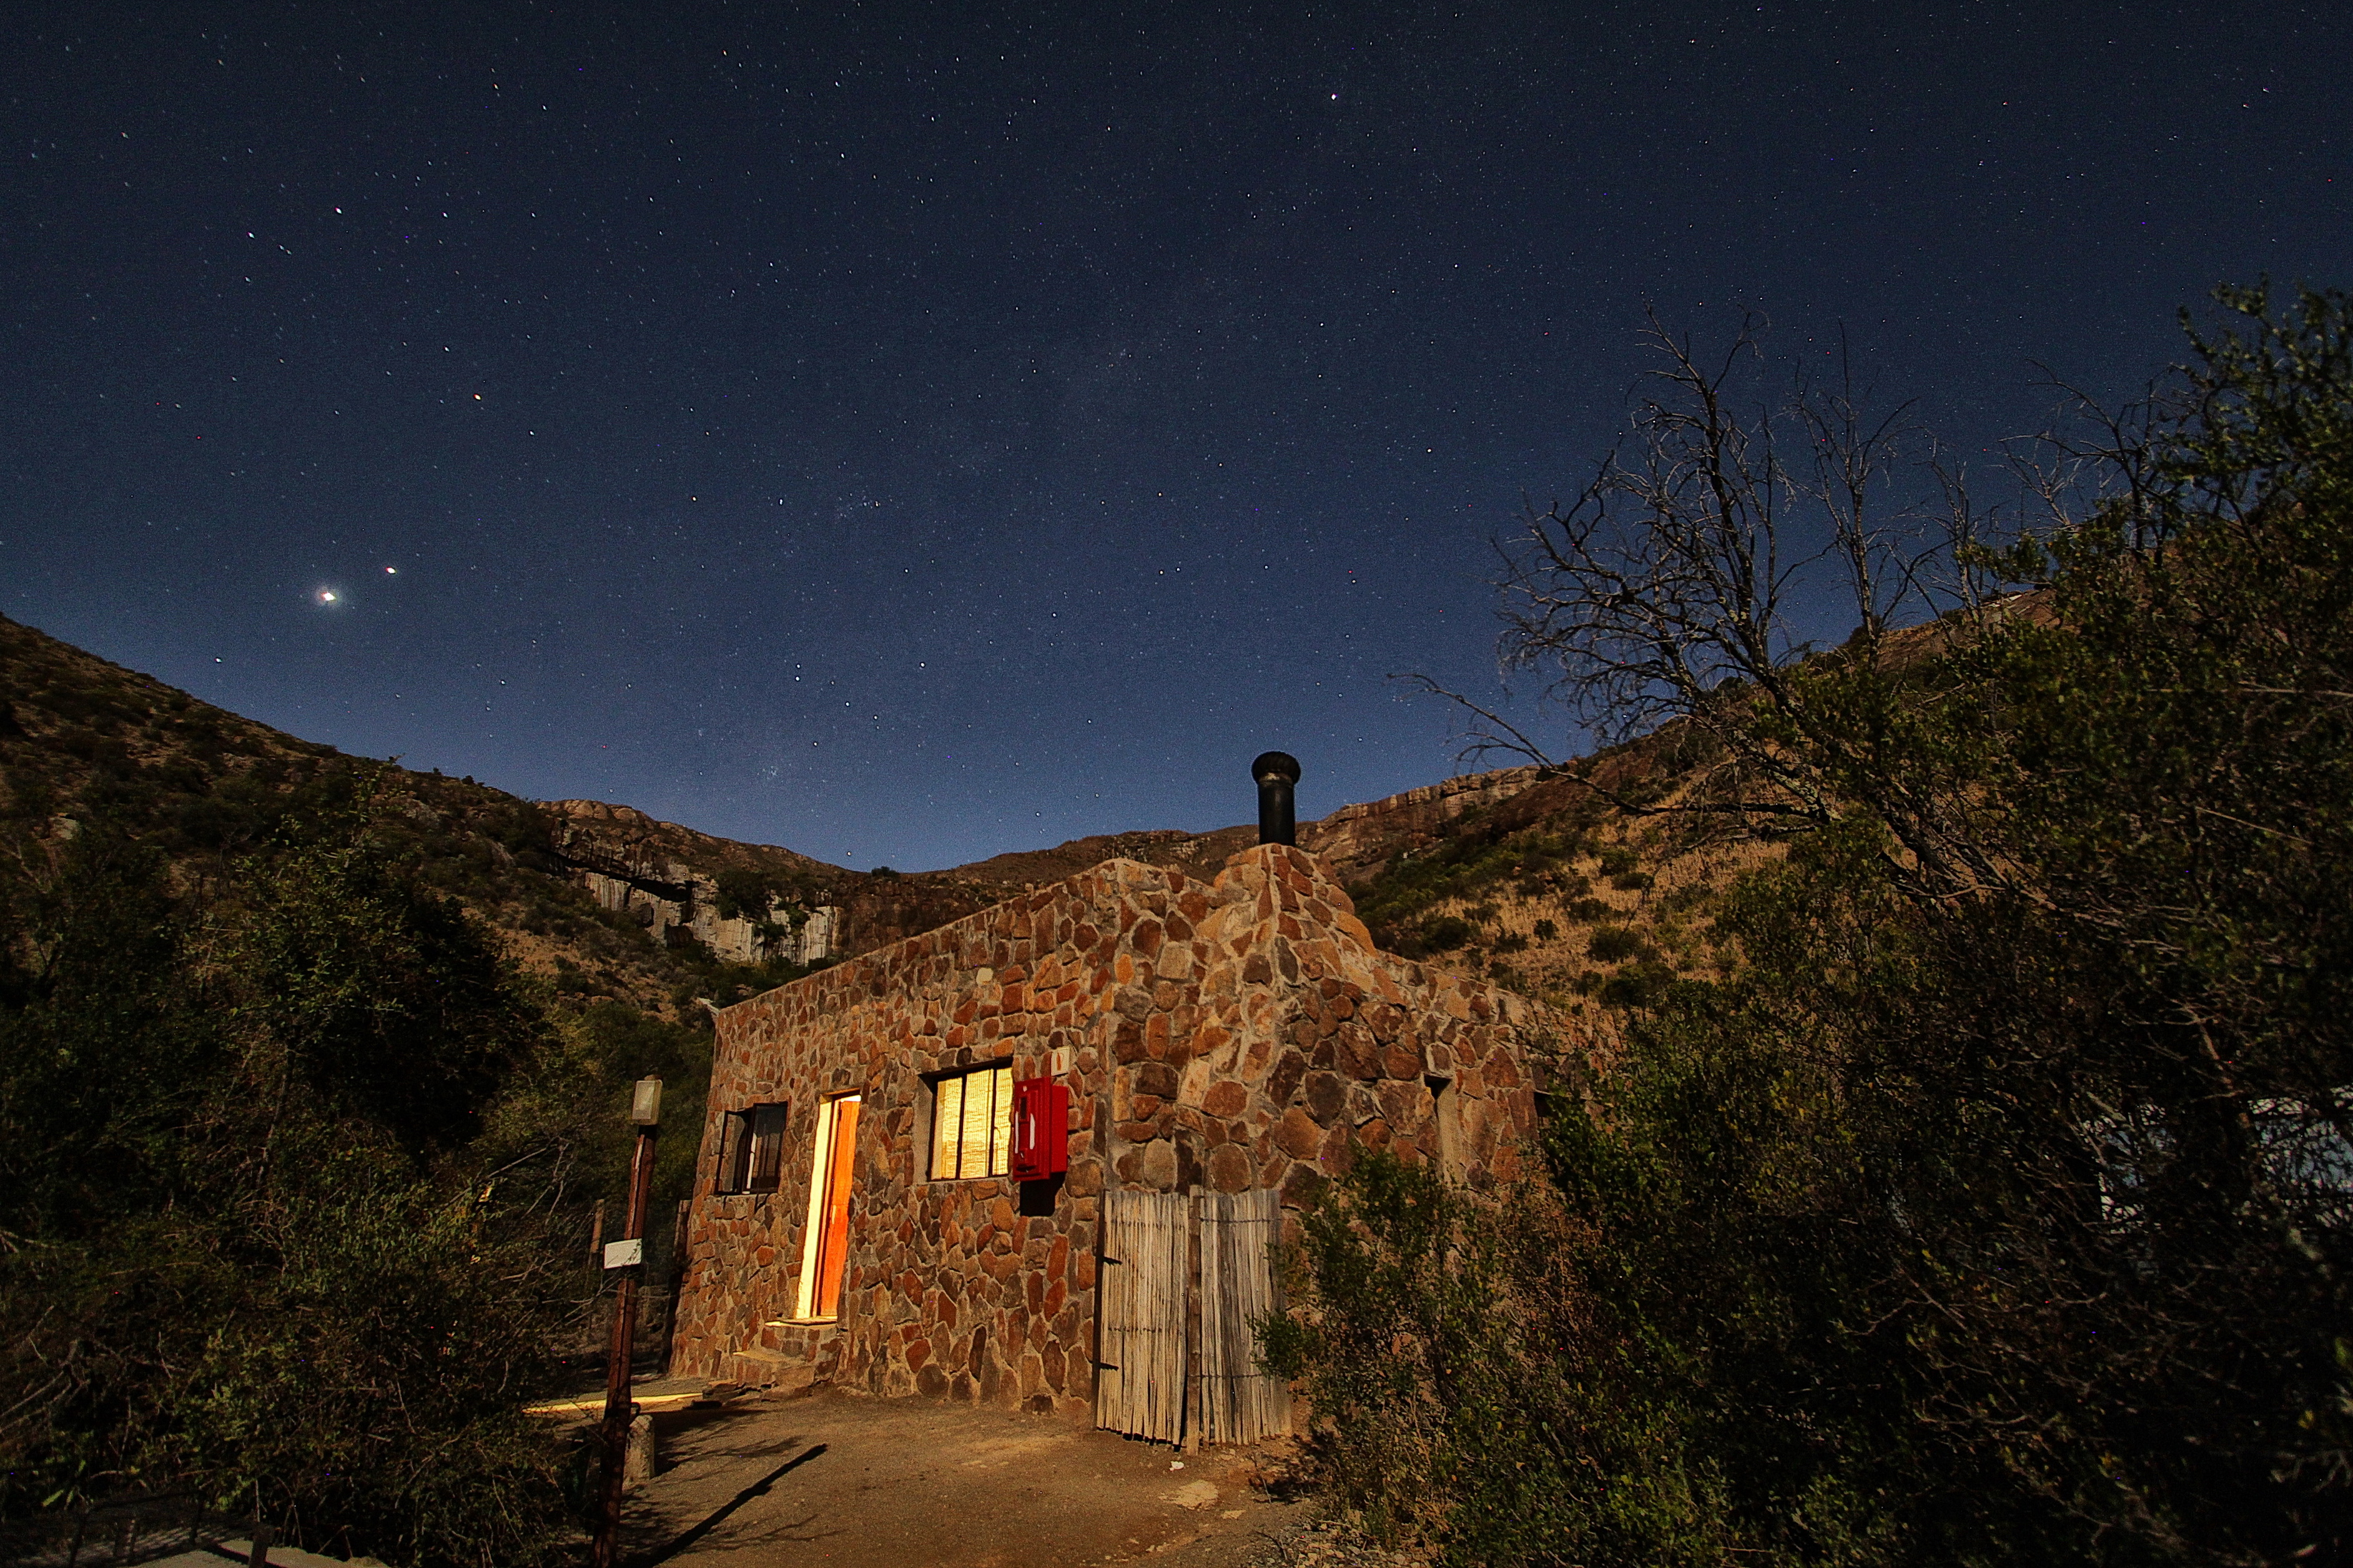 In an amphitheatre of rock, one of the mountain cottages at this national park just outside Cradock.